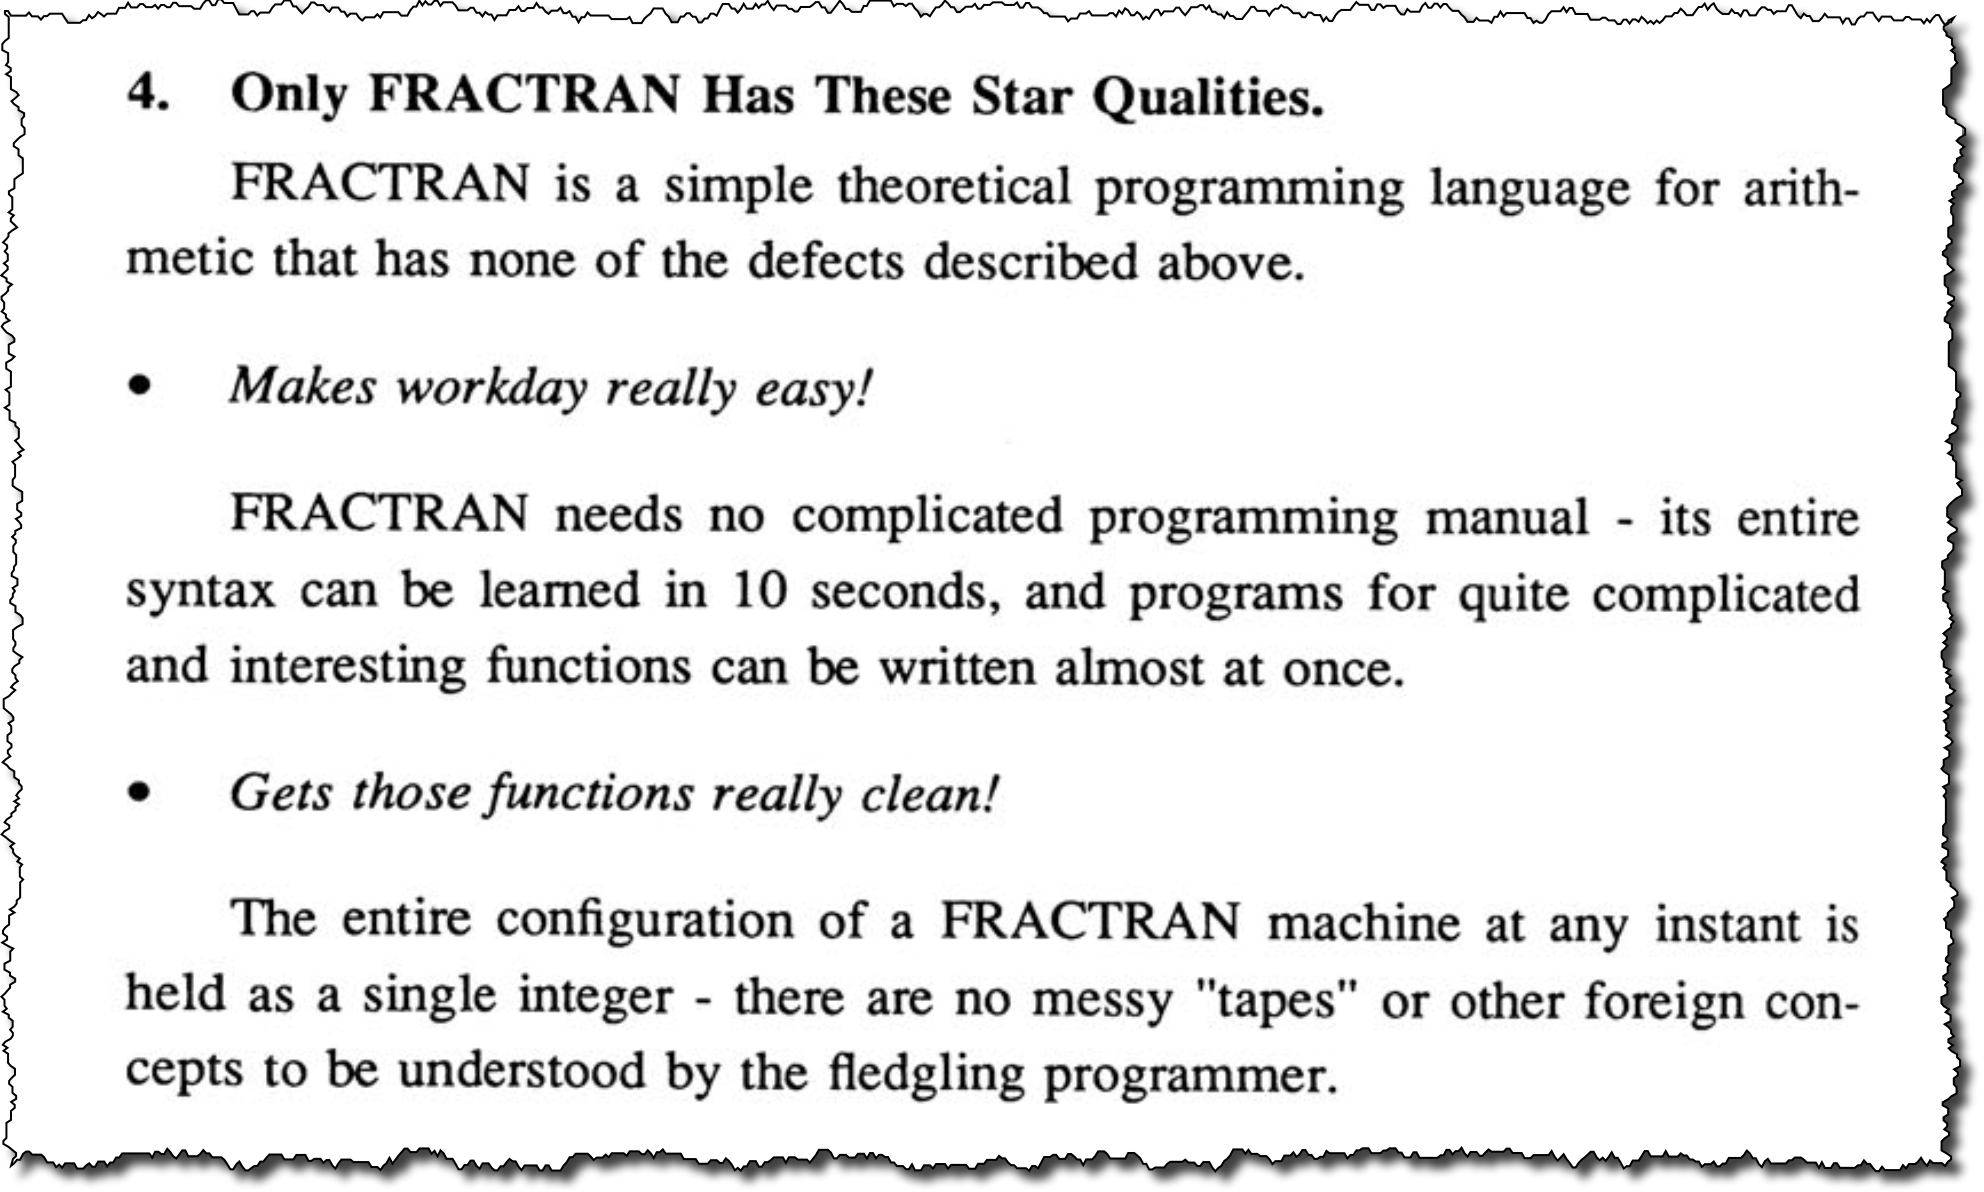 Only FRACTRAN has these star qualities